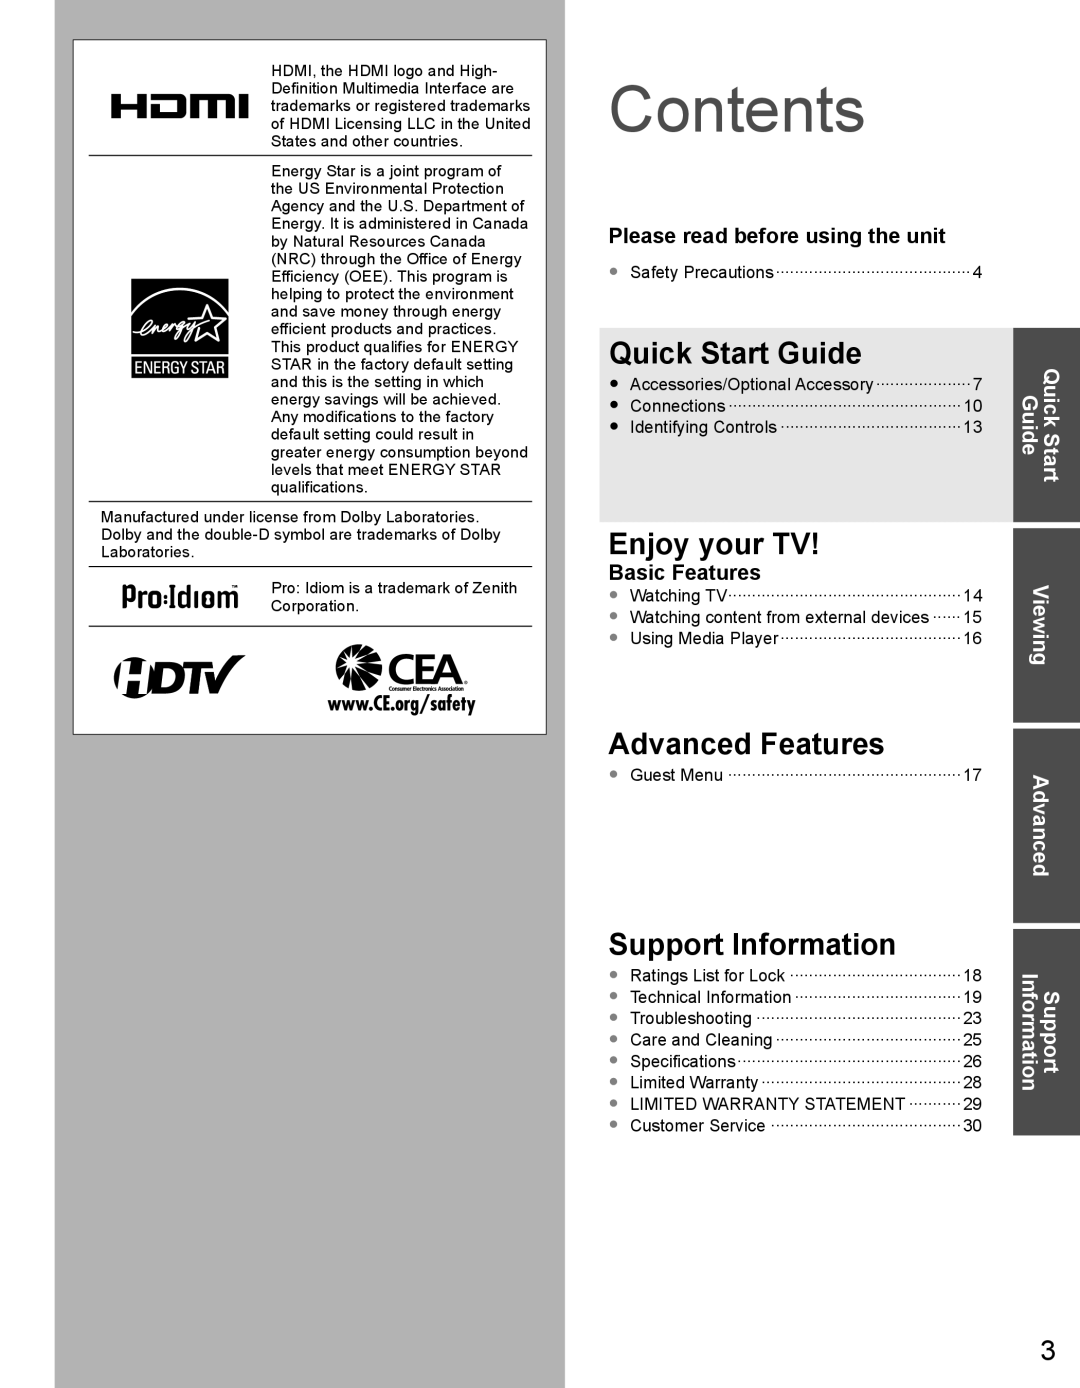 Panasonic TH32LRU60 Quick Start Guide, Enjoy your TV, Advanced Features, Support Information, QuickStart Guide, Contents 